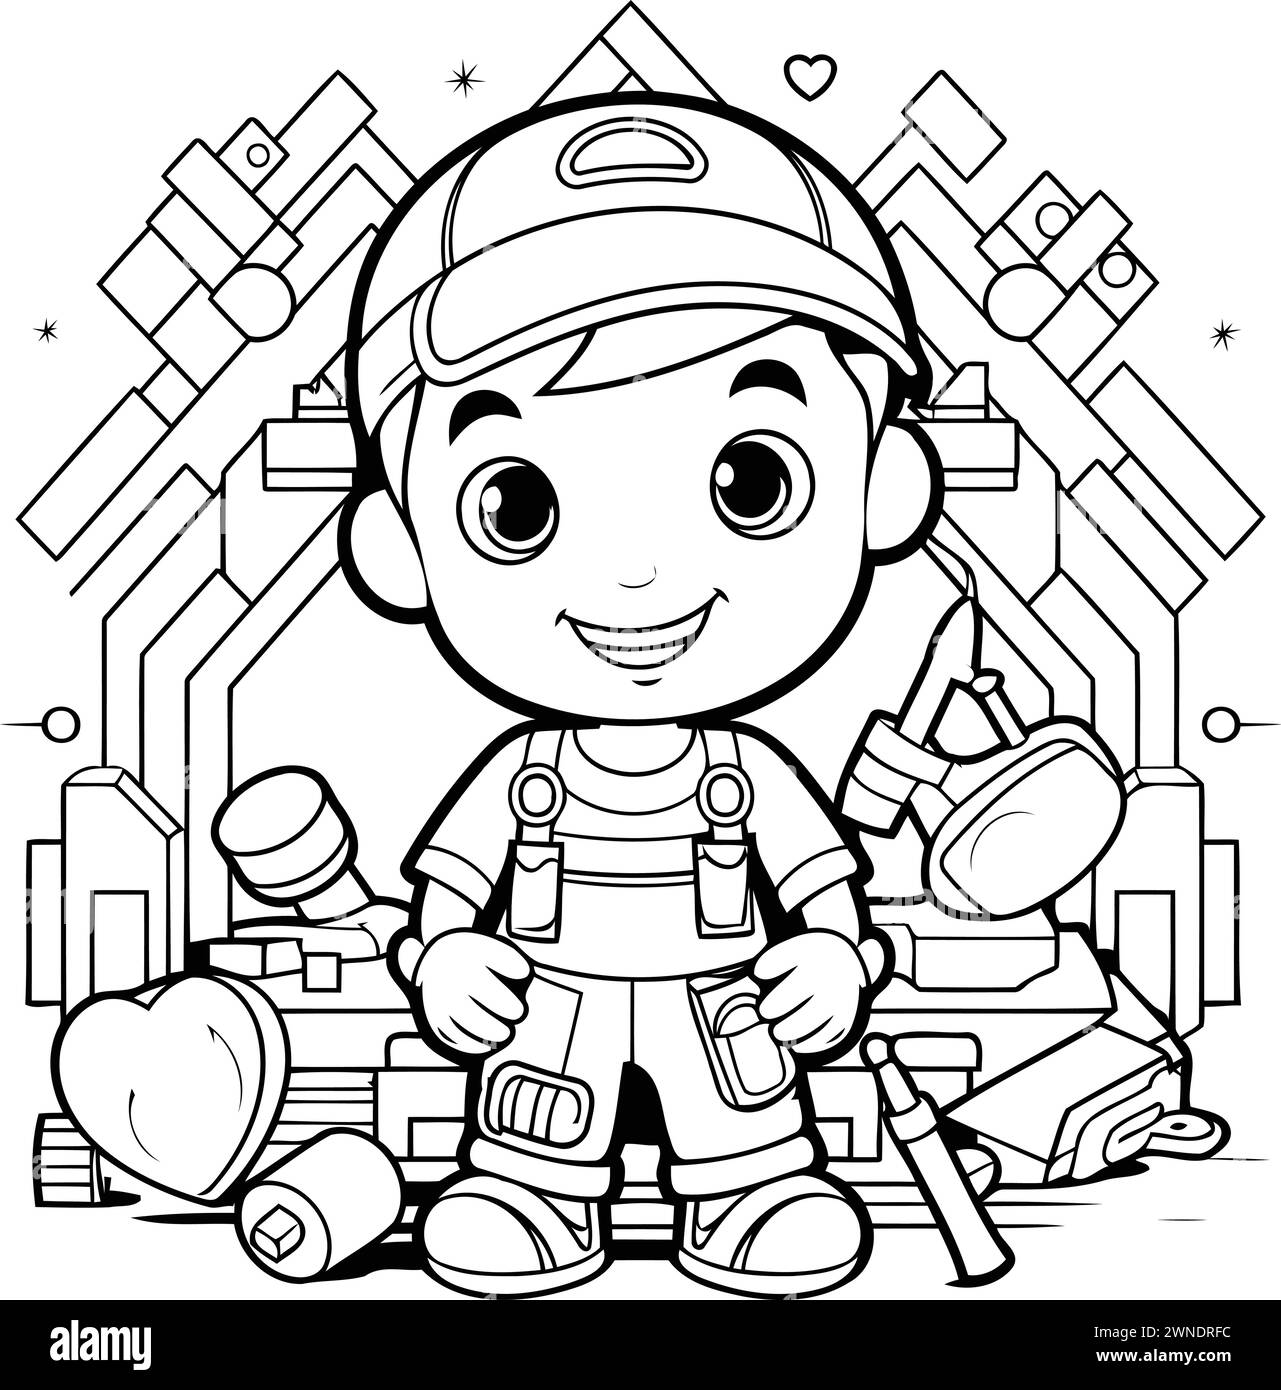 Black and White Cartoon Illustration of Cute Little Boy Builder or Constructor Character for Coloring Book Stock Vector